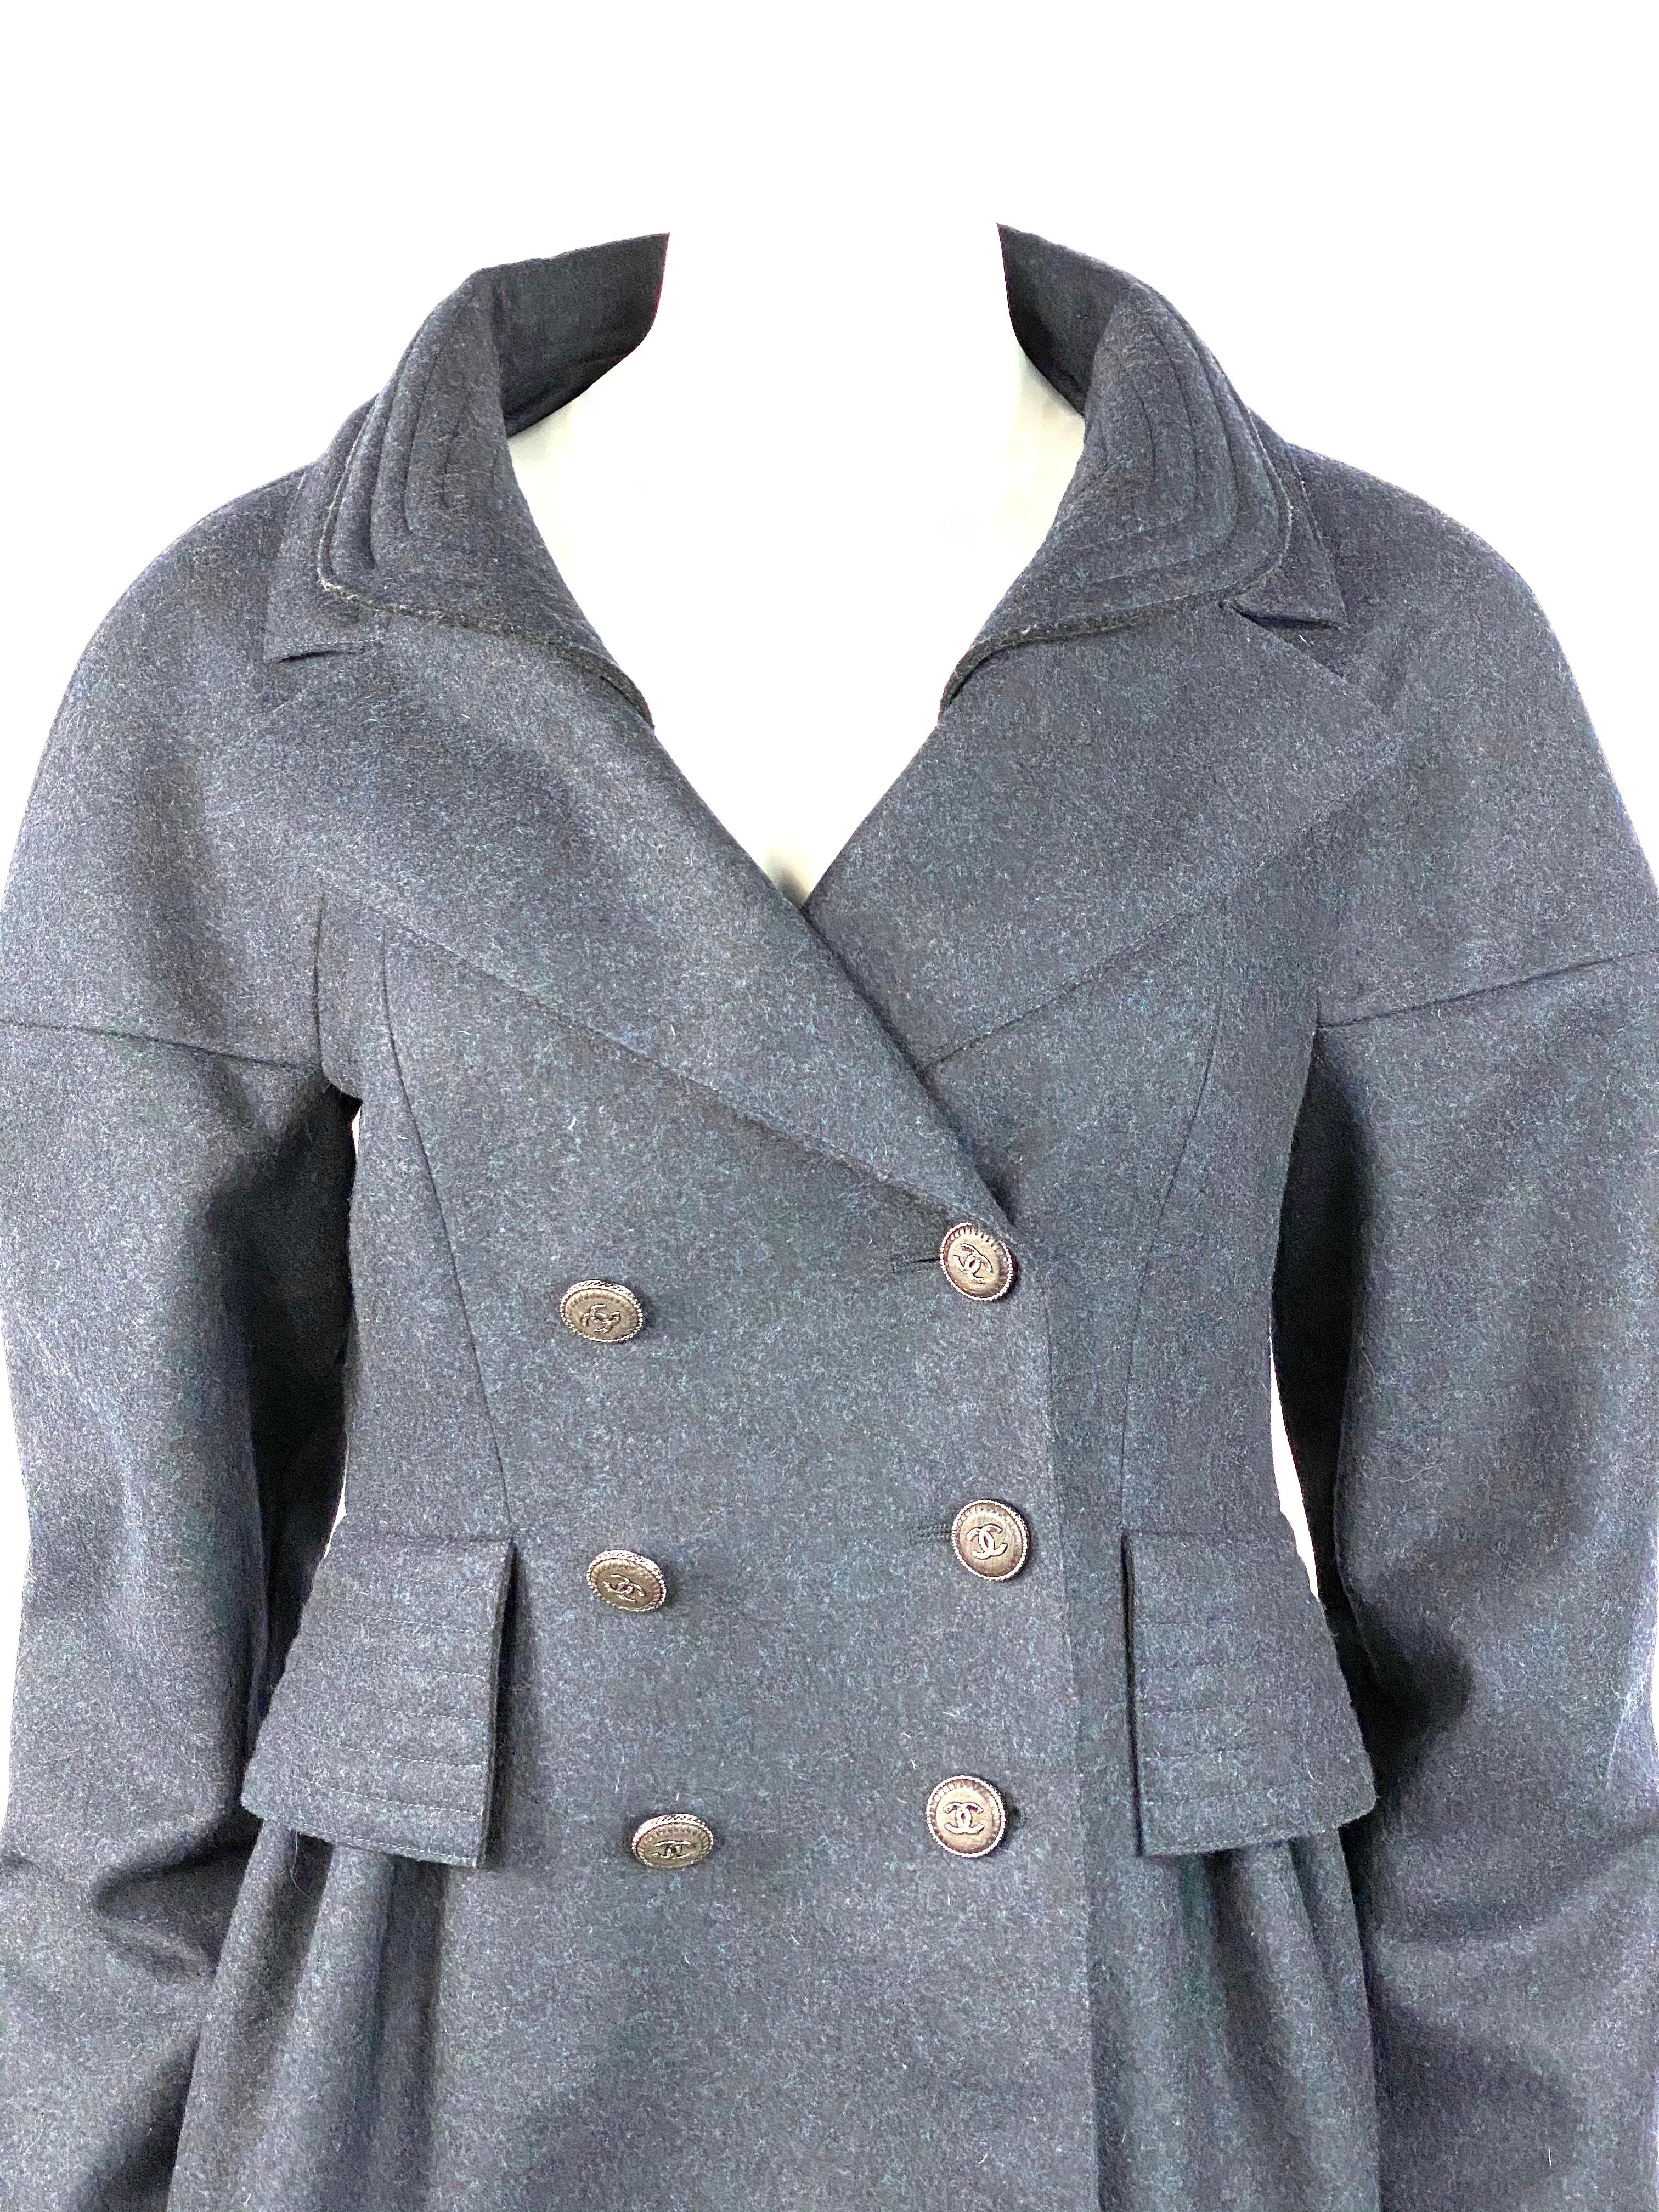 Chanel Navy Wool Short Length Coat Jacket w/ CC Buttons Size 40

Product details:
Size FR 40
Double lined w/ Chanel logo navy silk fabric 
Silver tone CC buttons
Front button closure 
Removable and adjustable inner collar
Imitated pockets on each